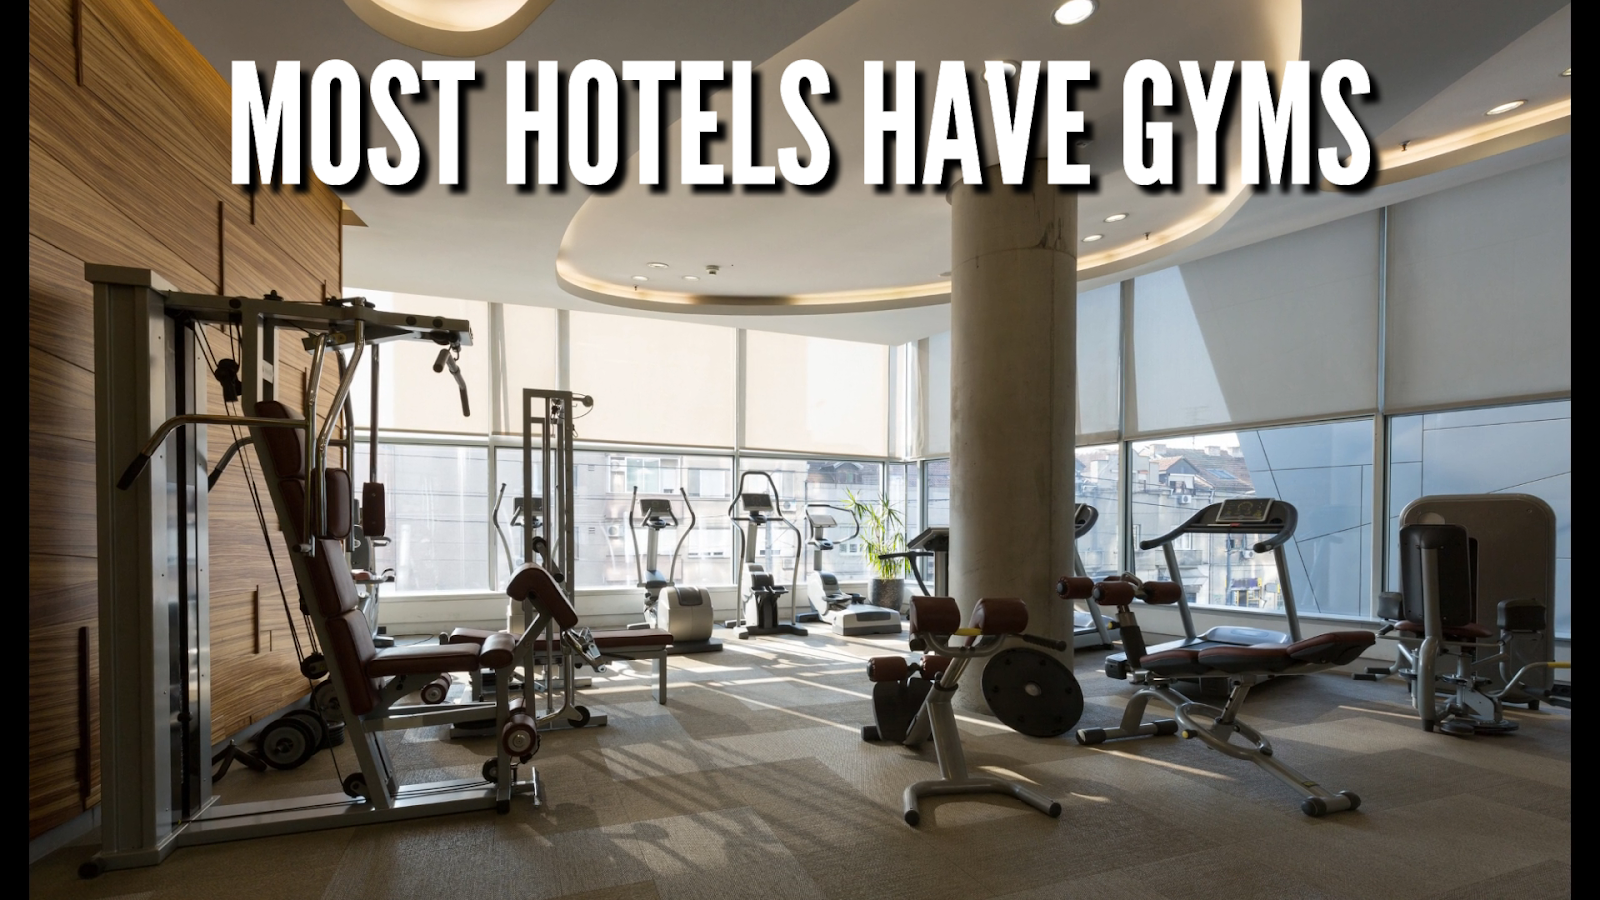 Most hotels have gyms so you can train on vacation